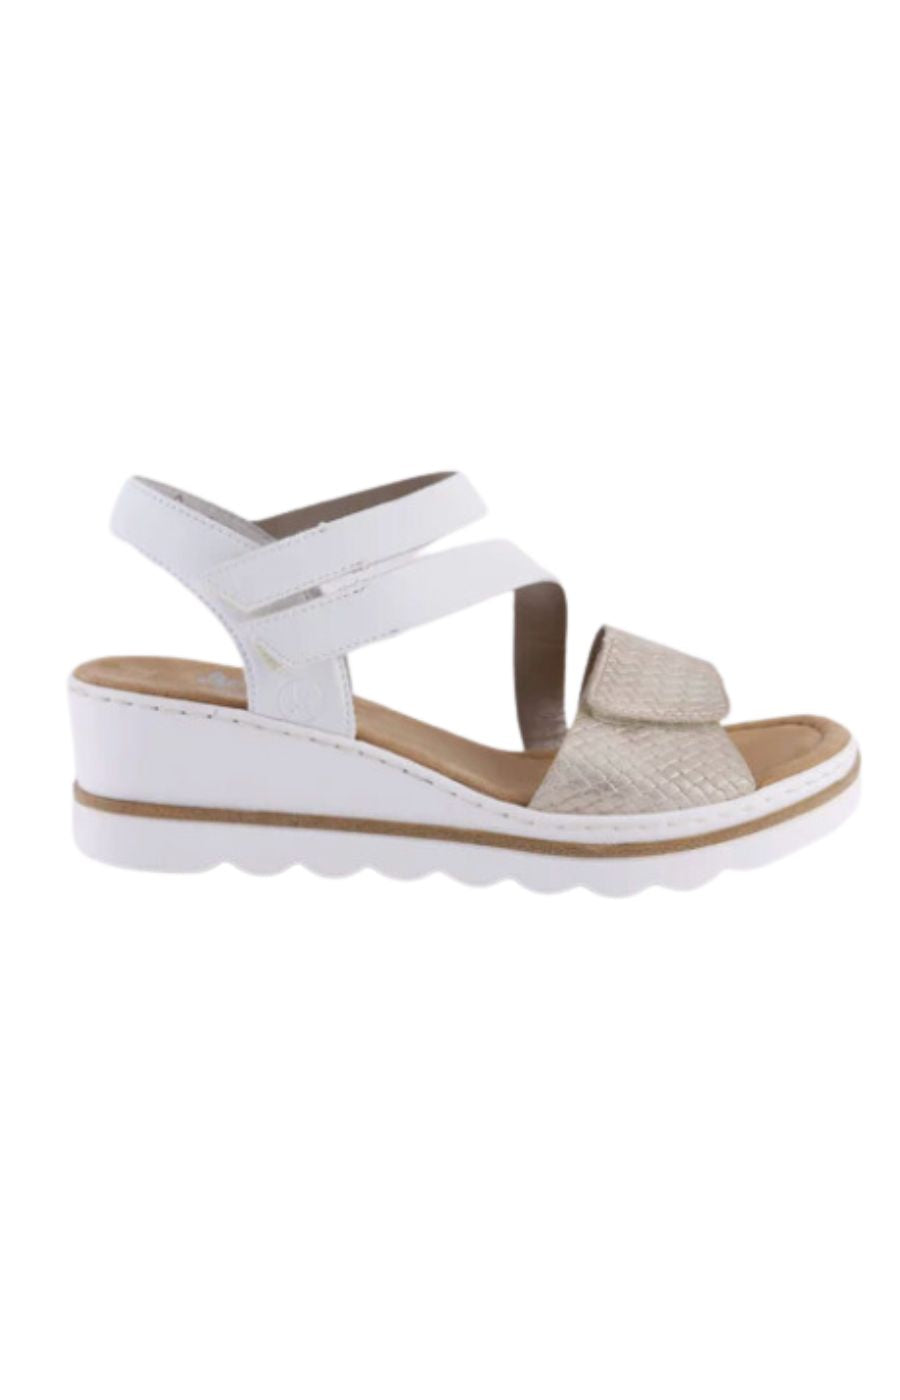 Rieker Strapped Wedge Sandal